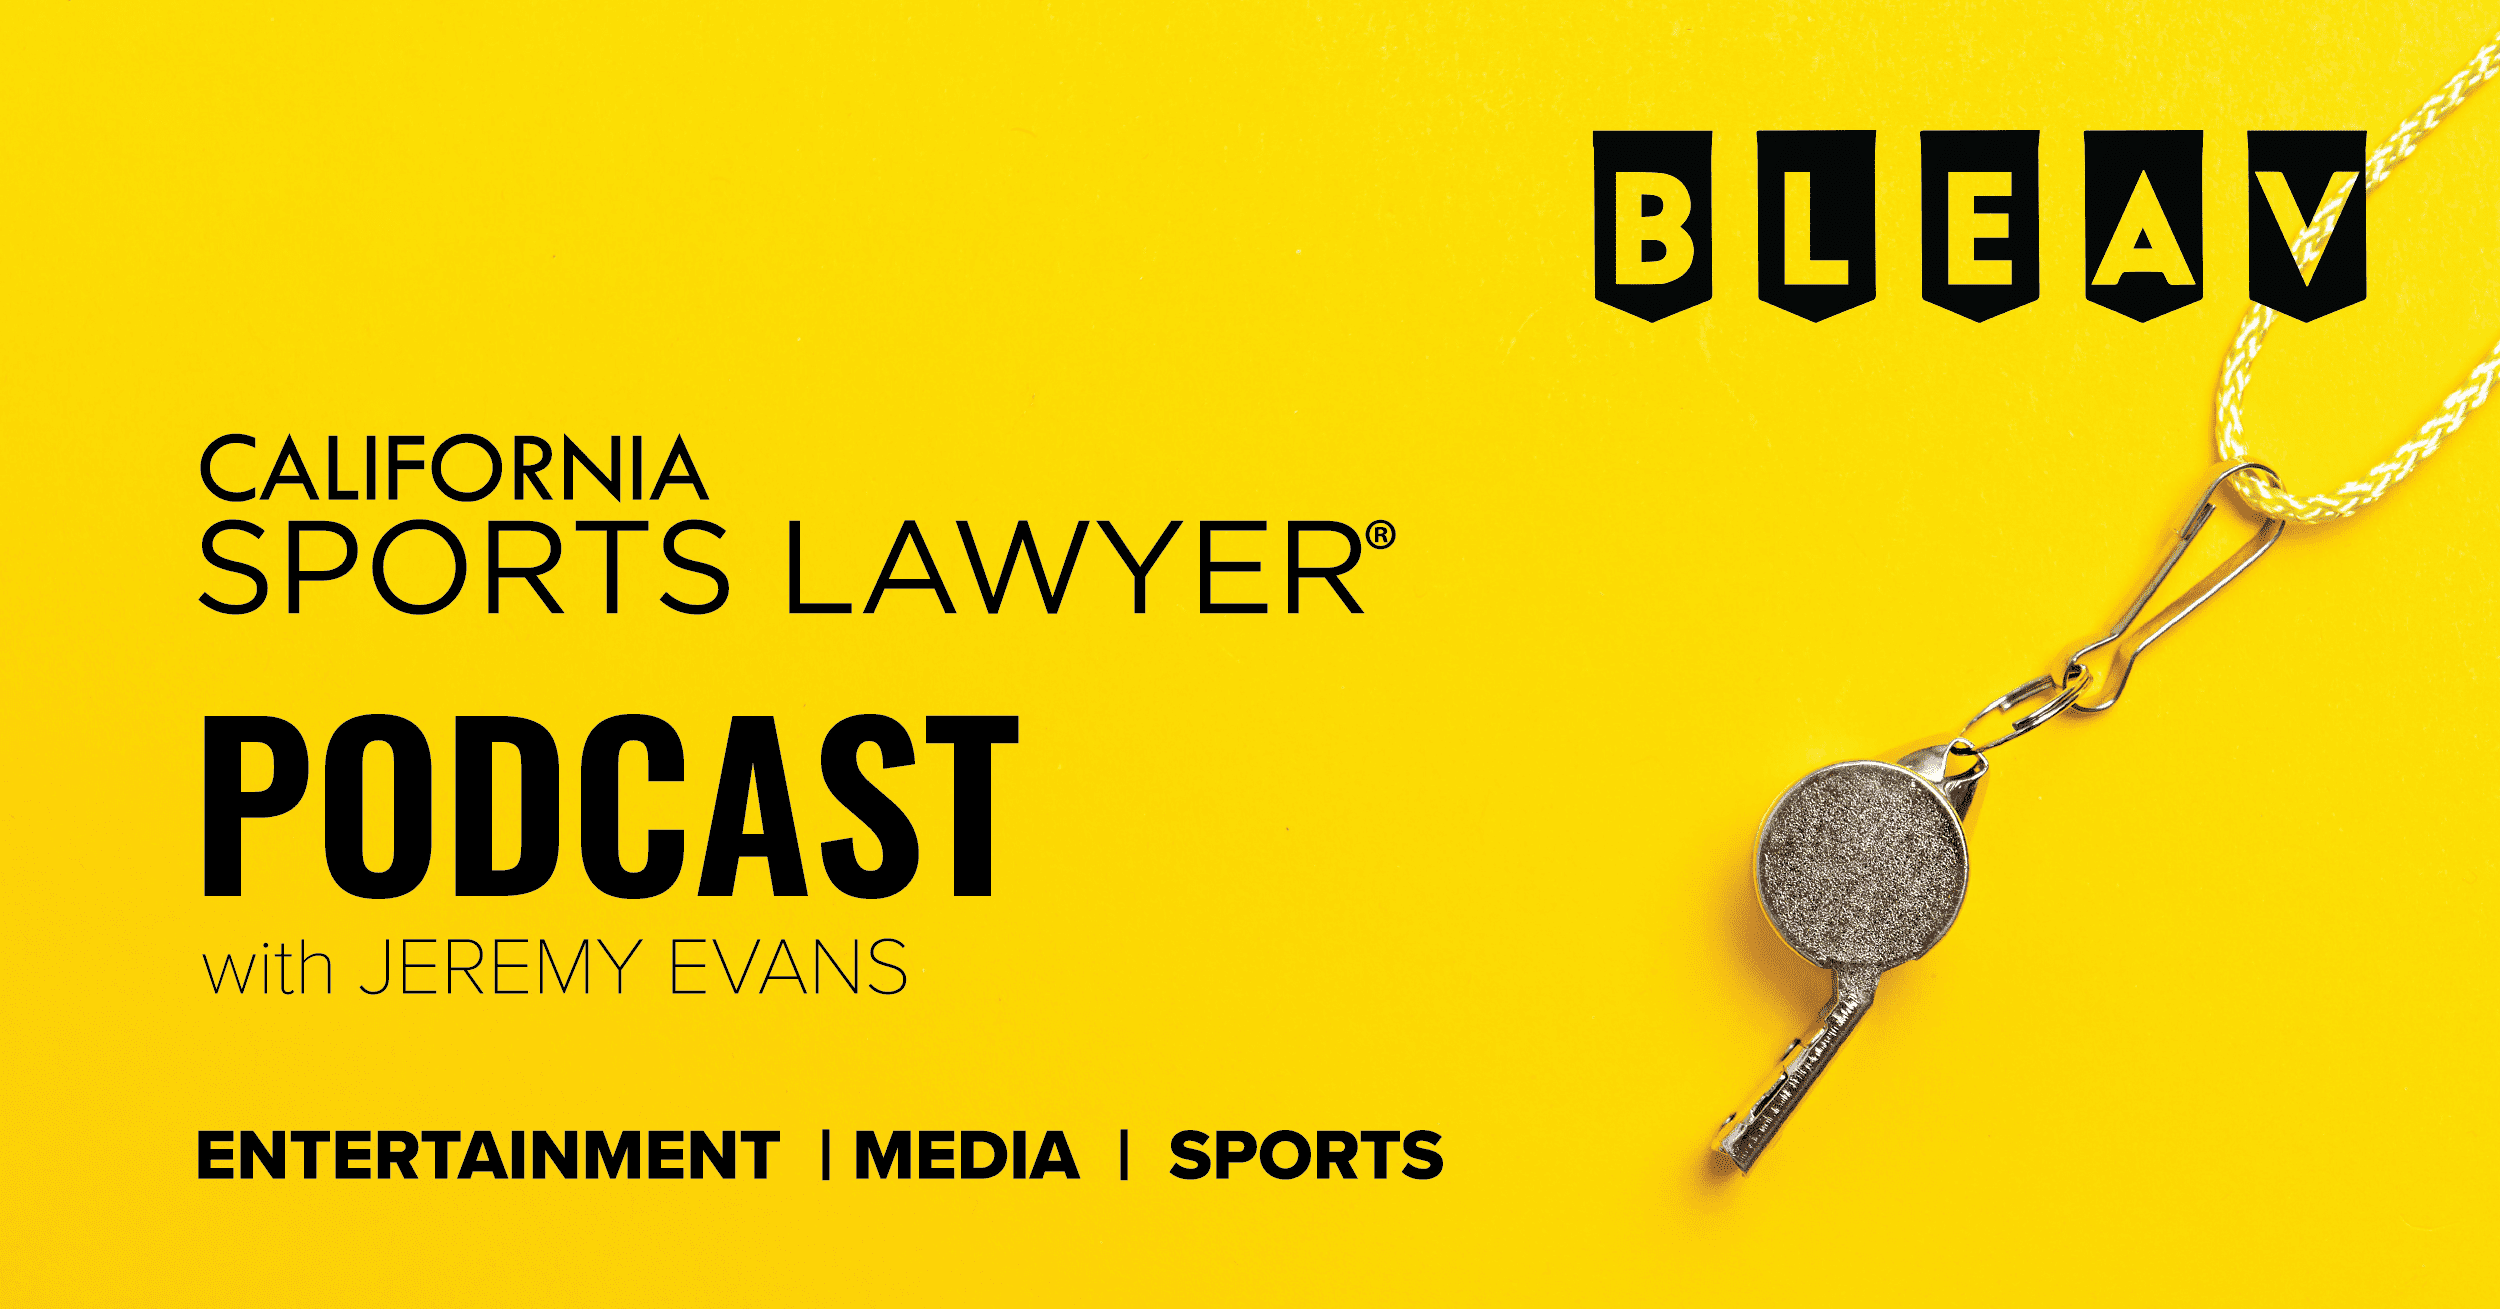 California Sports Lawyer® Podcast with Jeremy Evans: Shared Content and Streaming Platforms replacing Exclusivity